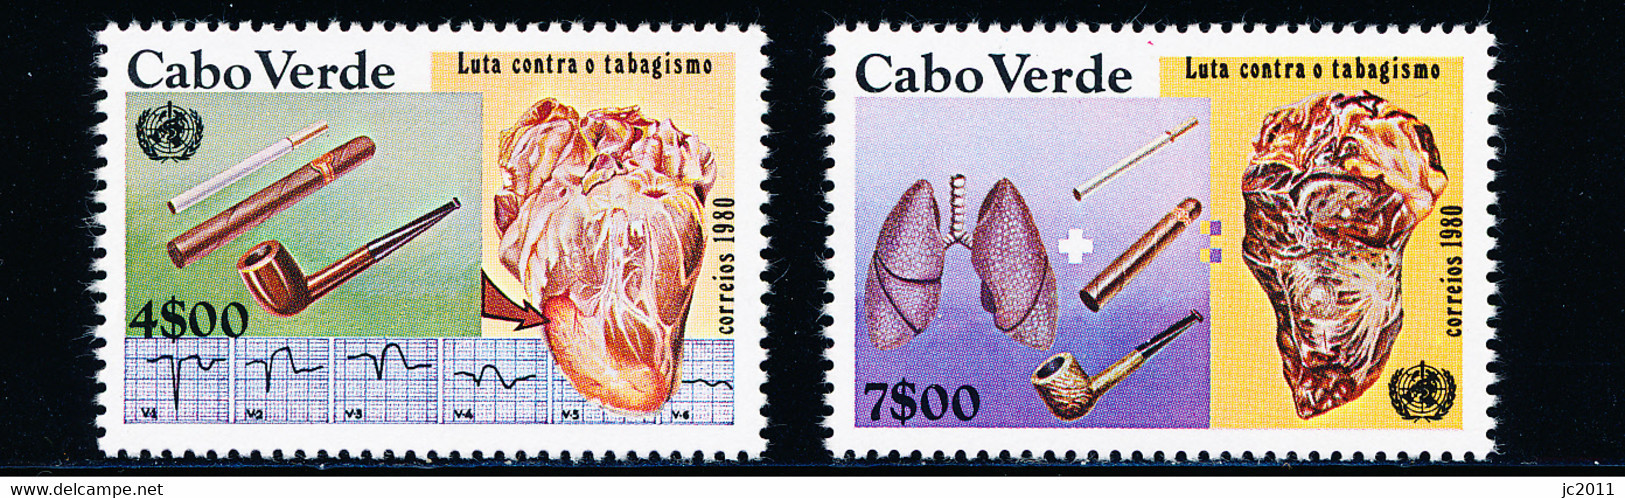 Cabo Verde - 1980 - Smoking / Fight Against - World Health Day - MNH - Cape Verde